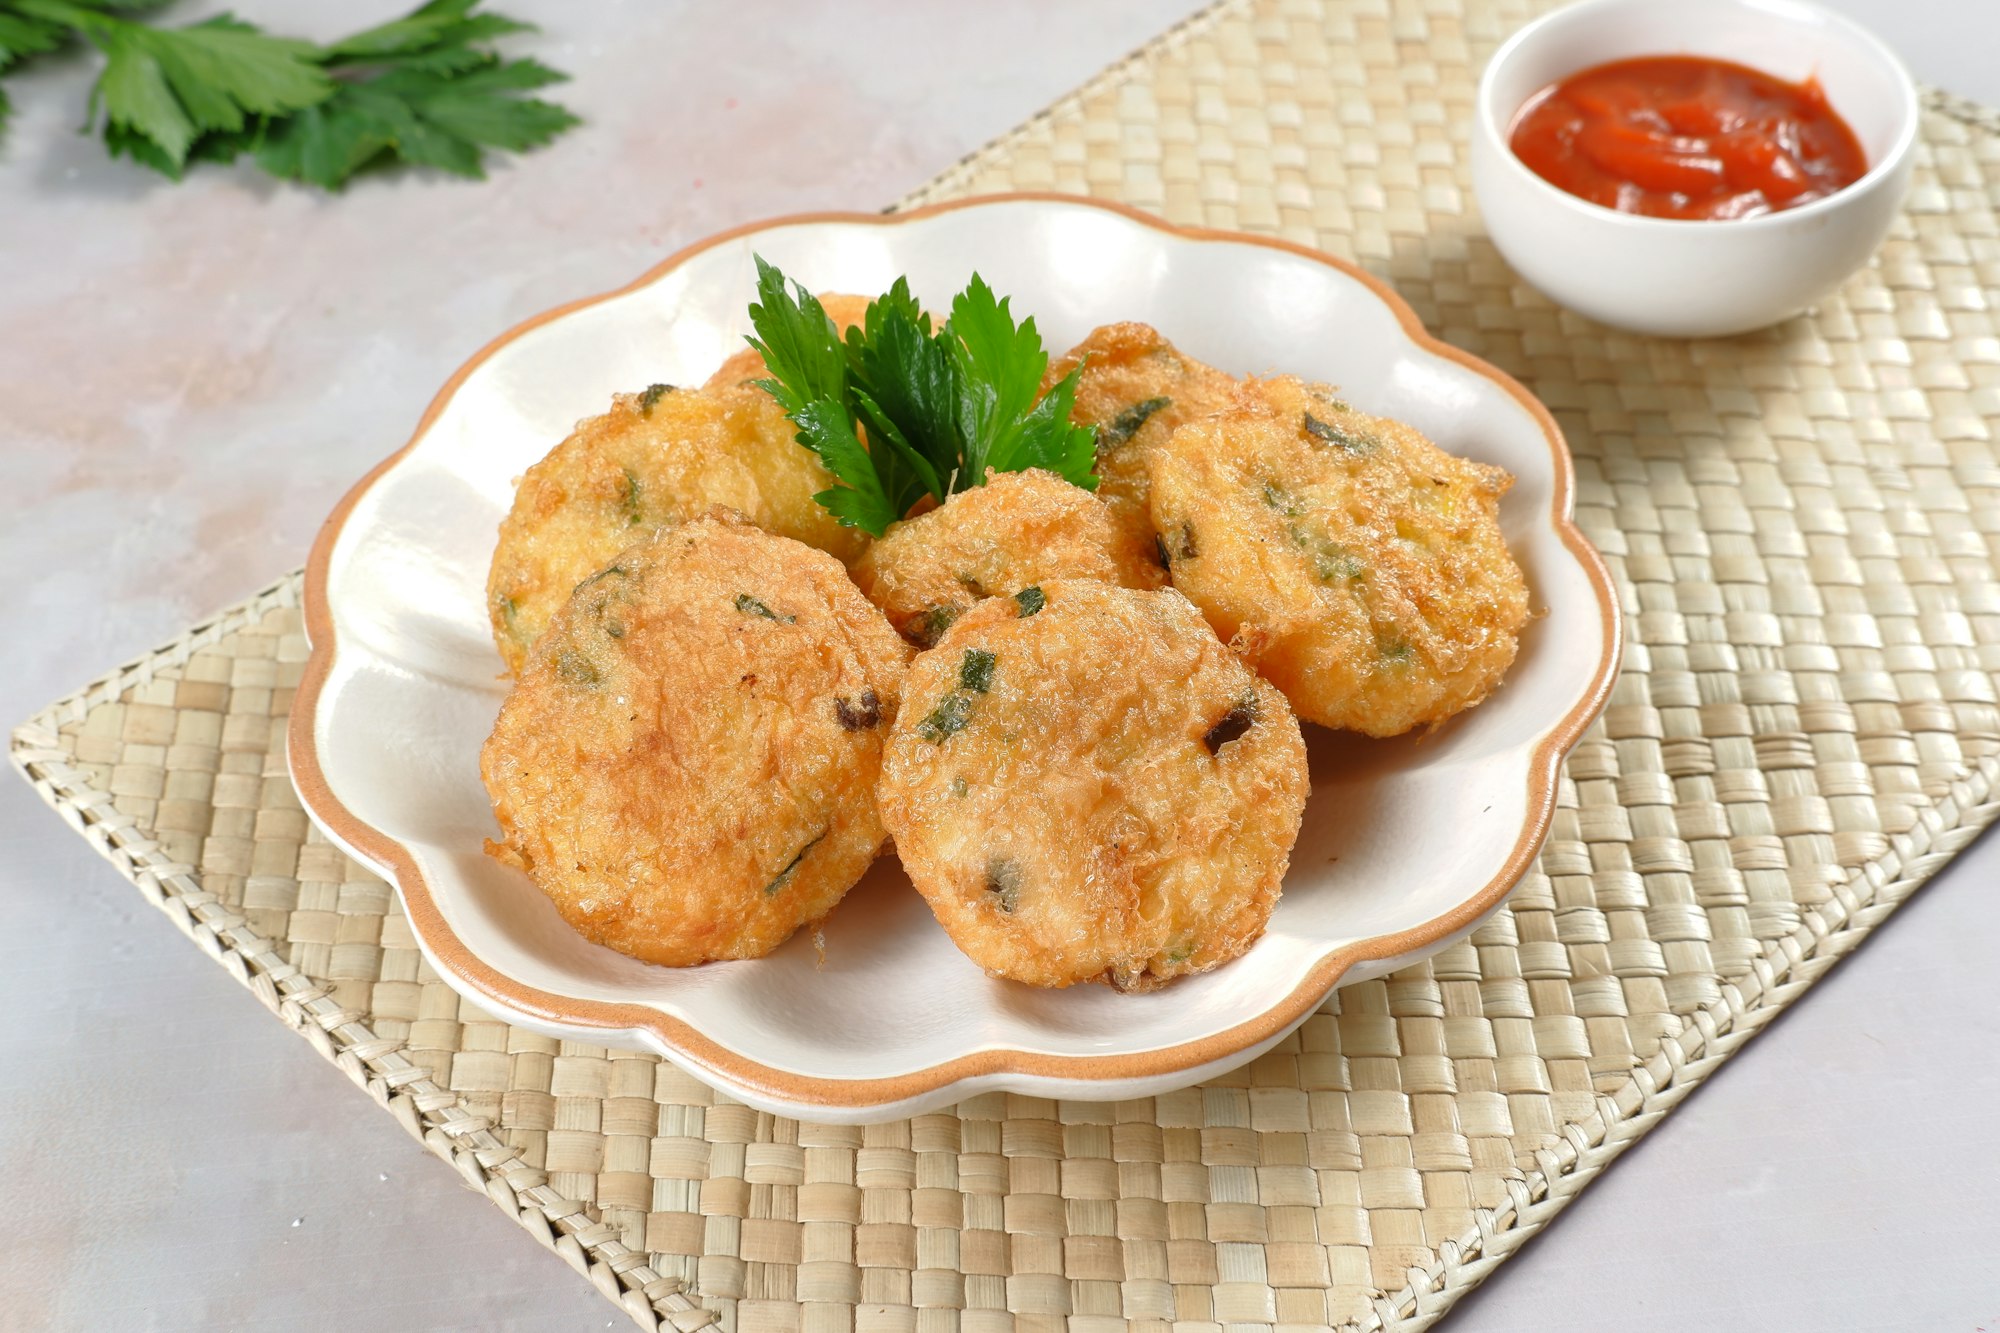 Perkedel, Indonesian fried mashed potato minced beef patties